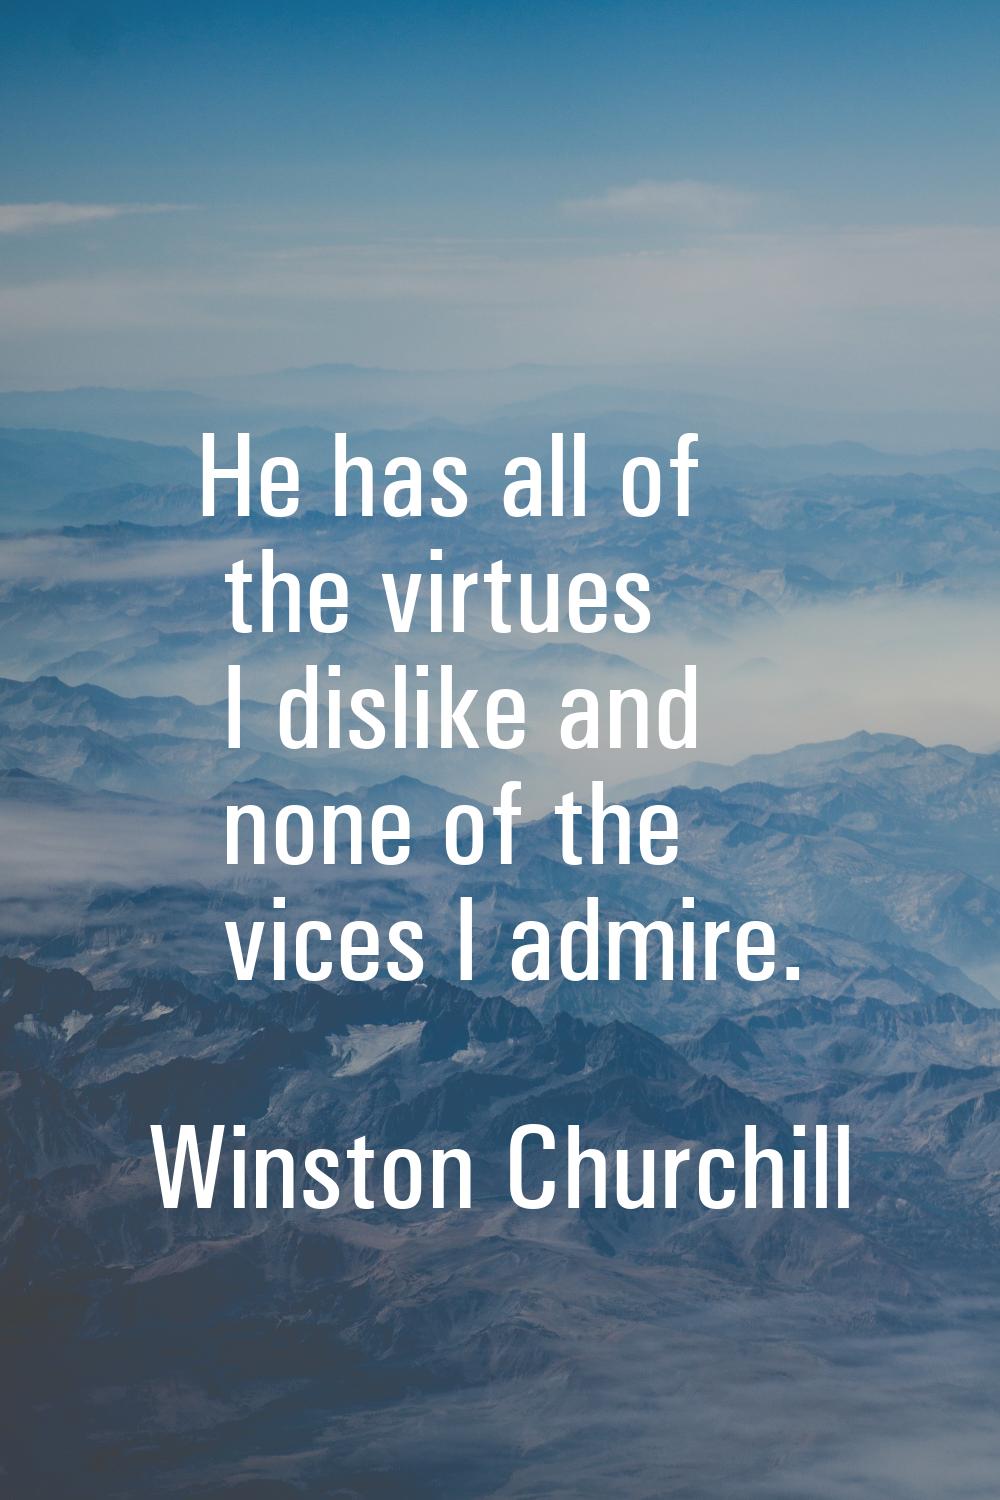 He has all of the virtues I dislike and none of the vices I admire.